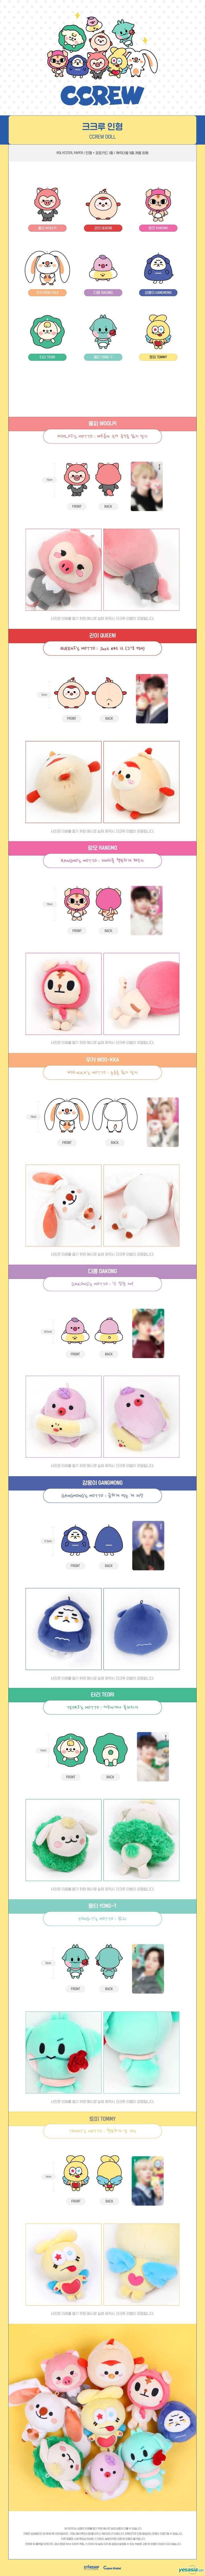 YESASIA: Image Gallery - Cravity 'CCREW' Official Goods - Doll 